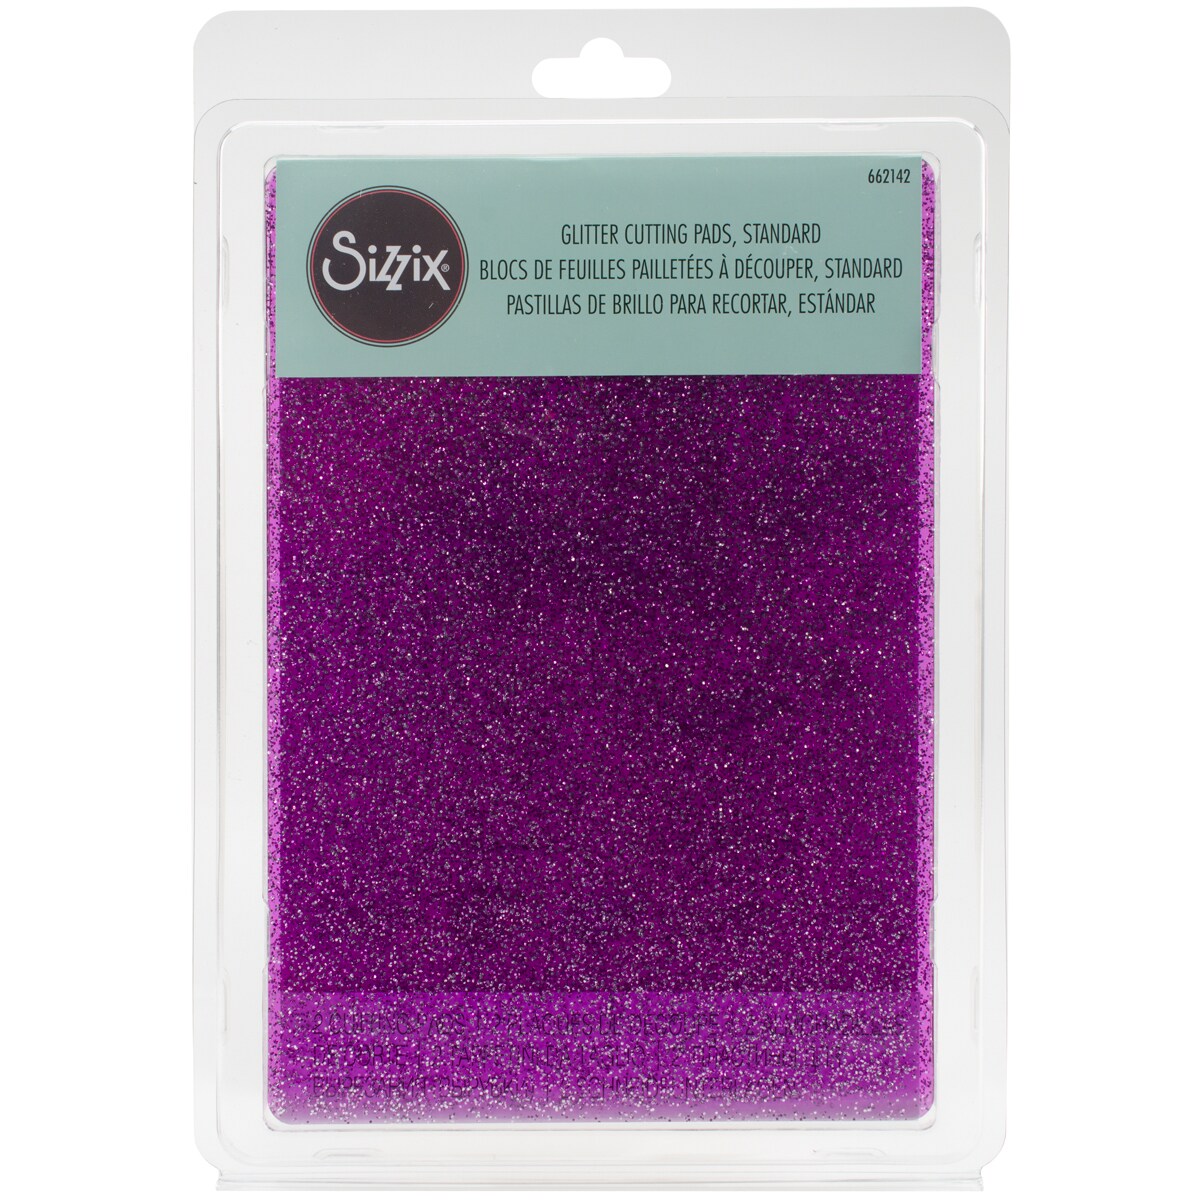 Sizzix Cutting Pads for sale